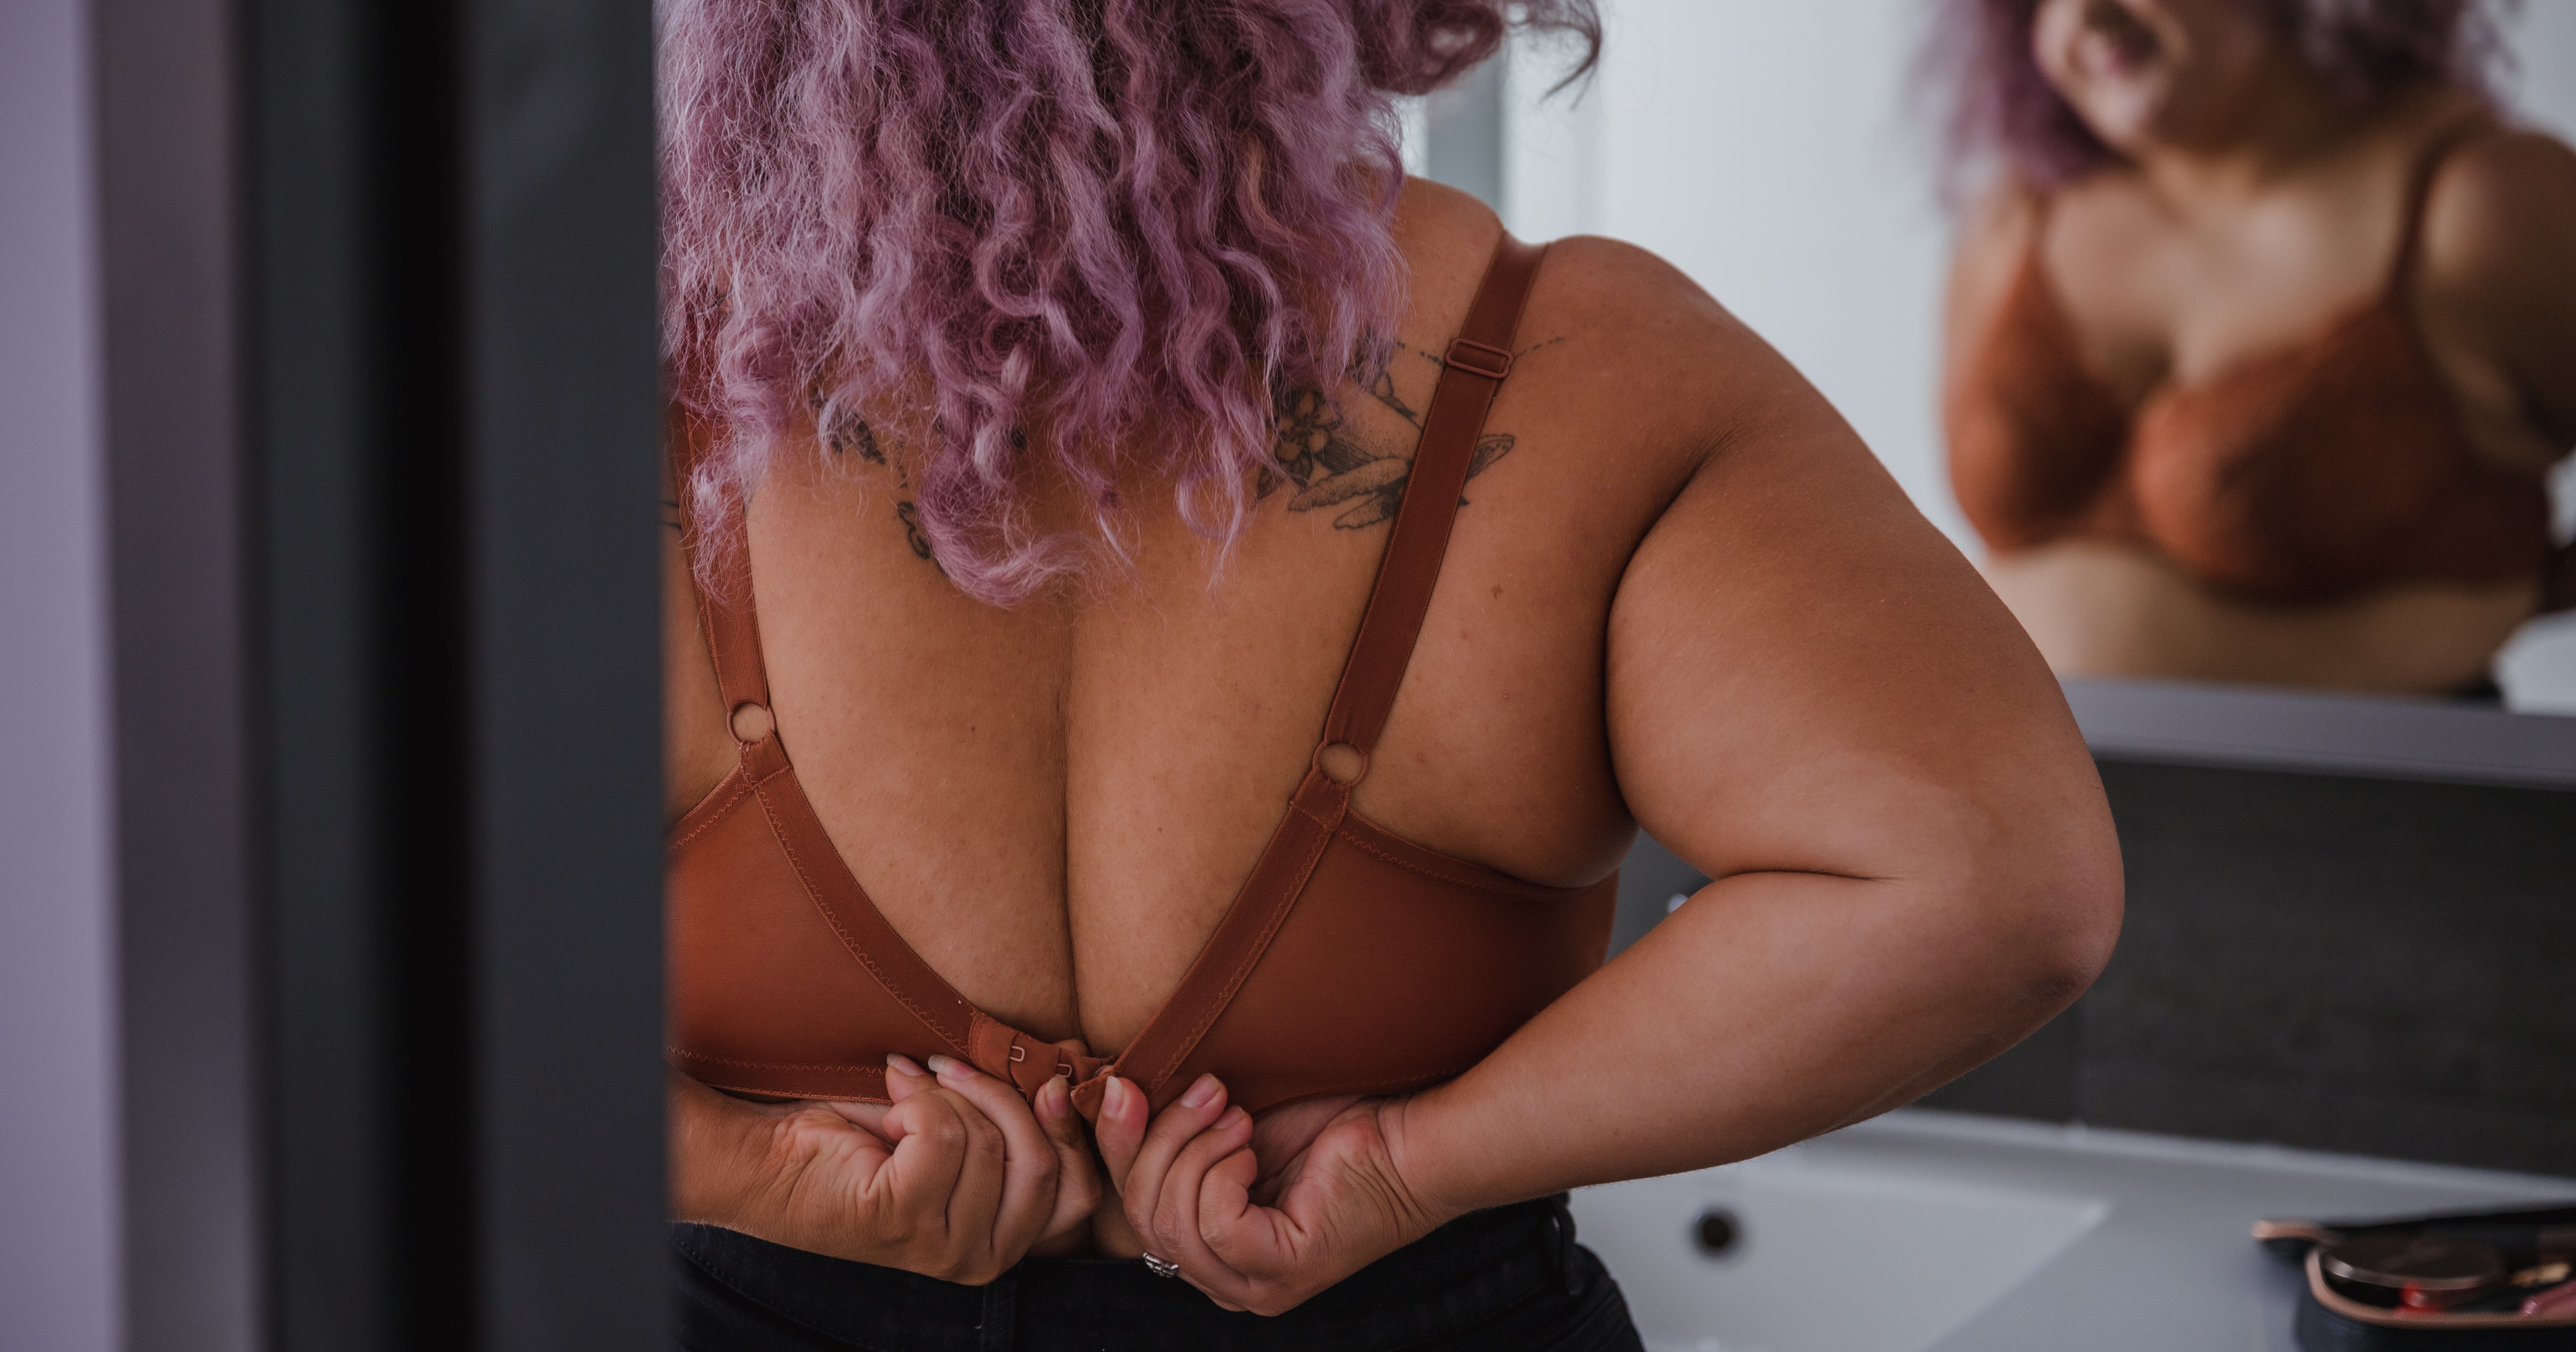 24 Real Photos Of Women's Breasts — No Filter (NSFW)